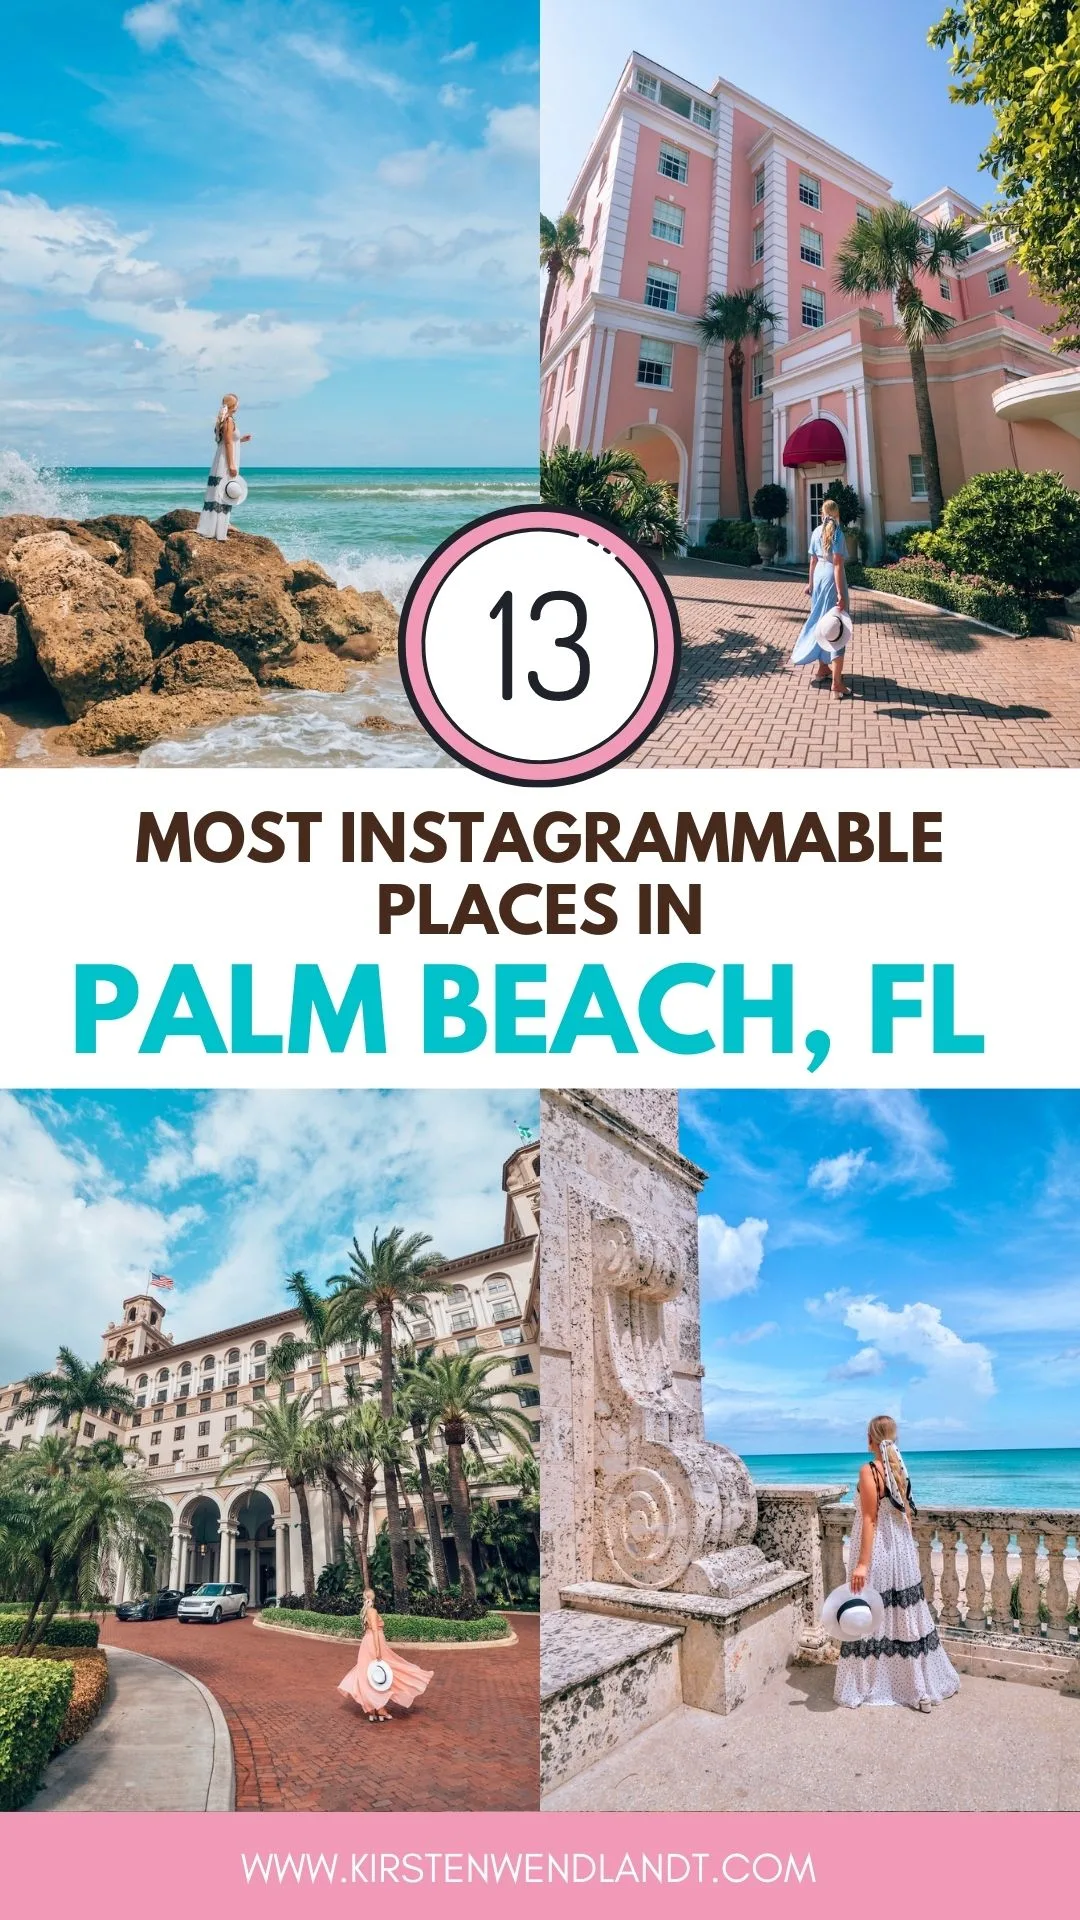 Palm Beach is a beautiful town in the South of Florida that's known for it's glamorous estates and sprawling beaches. It's no surprise that this stunning little town is chock full of incredible instagram-worthy photo spots. If you're planning on visiting Palm Beach soon and hoping to get some great photos while you're there, you definitely won't want to miss this guide on the most instagrammables places in Palm Beach!